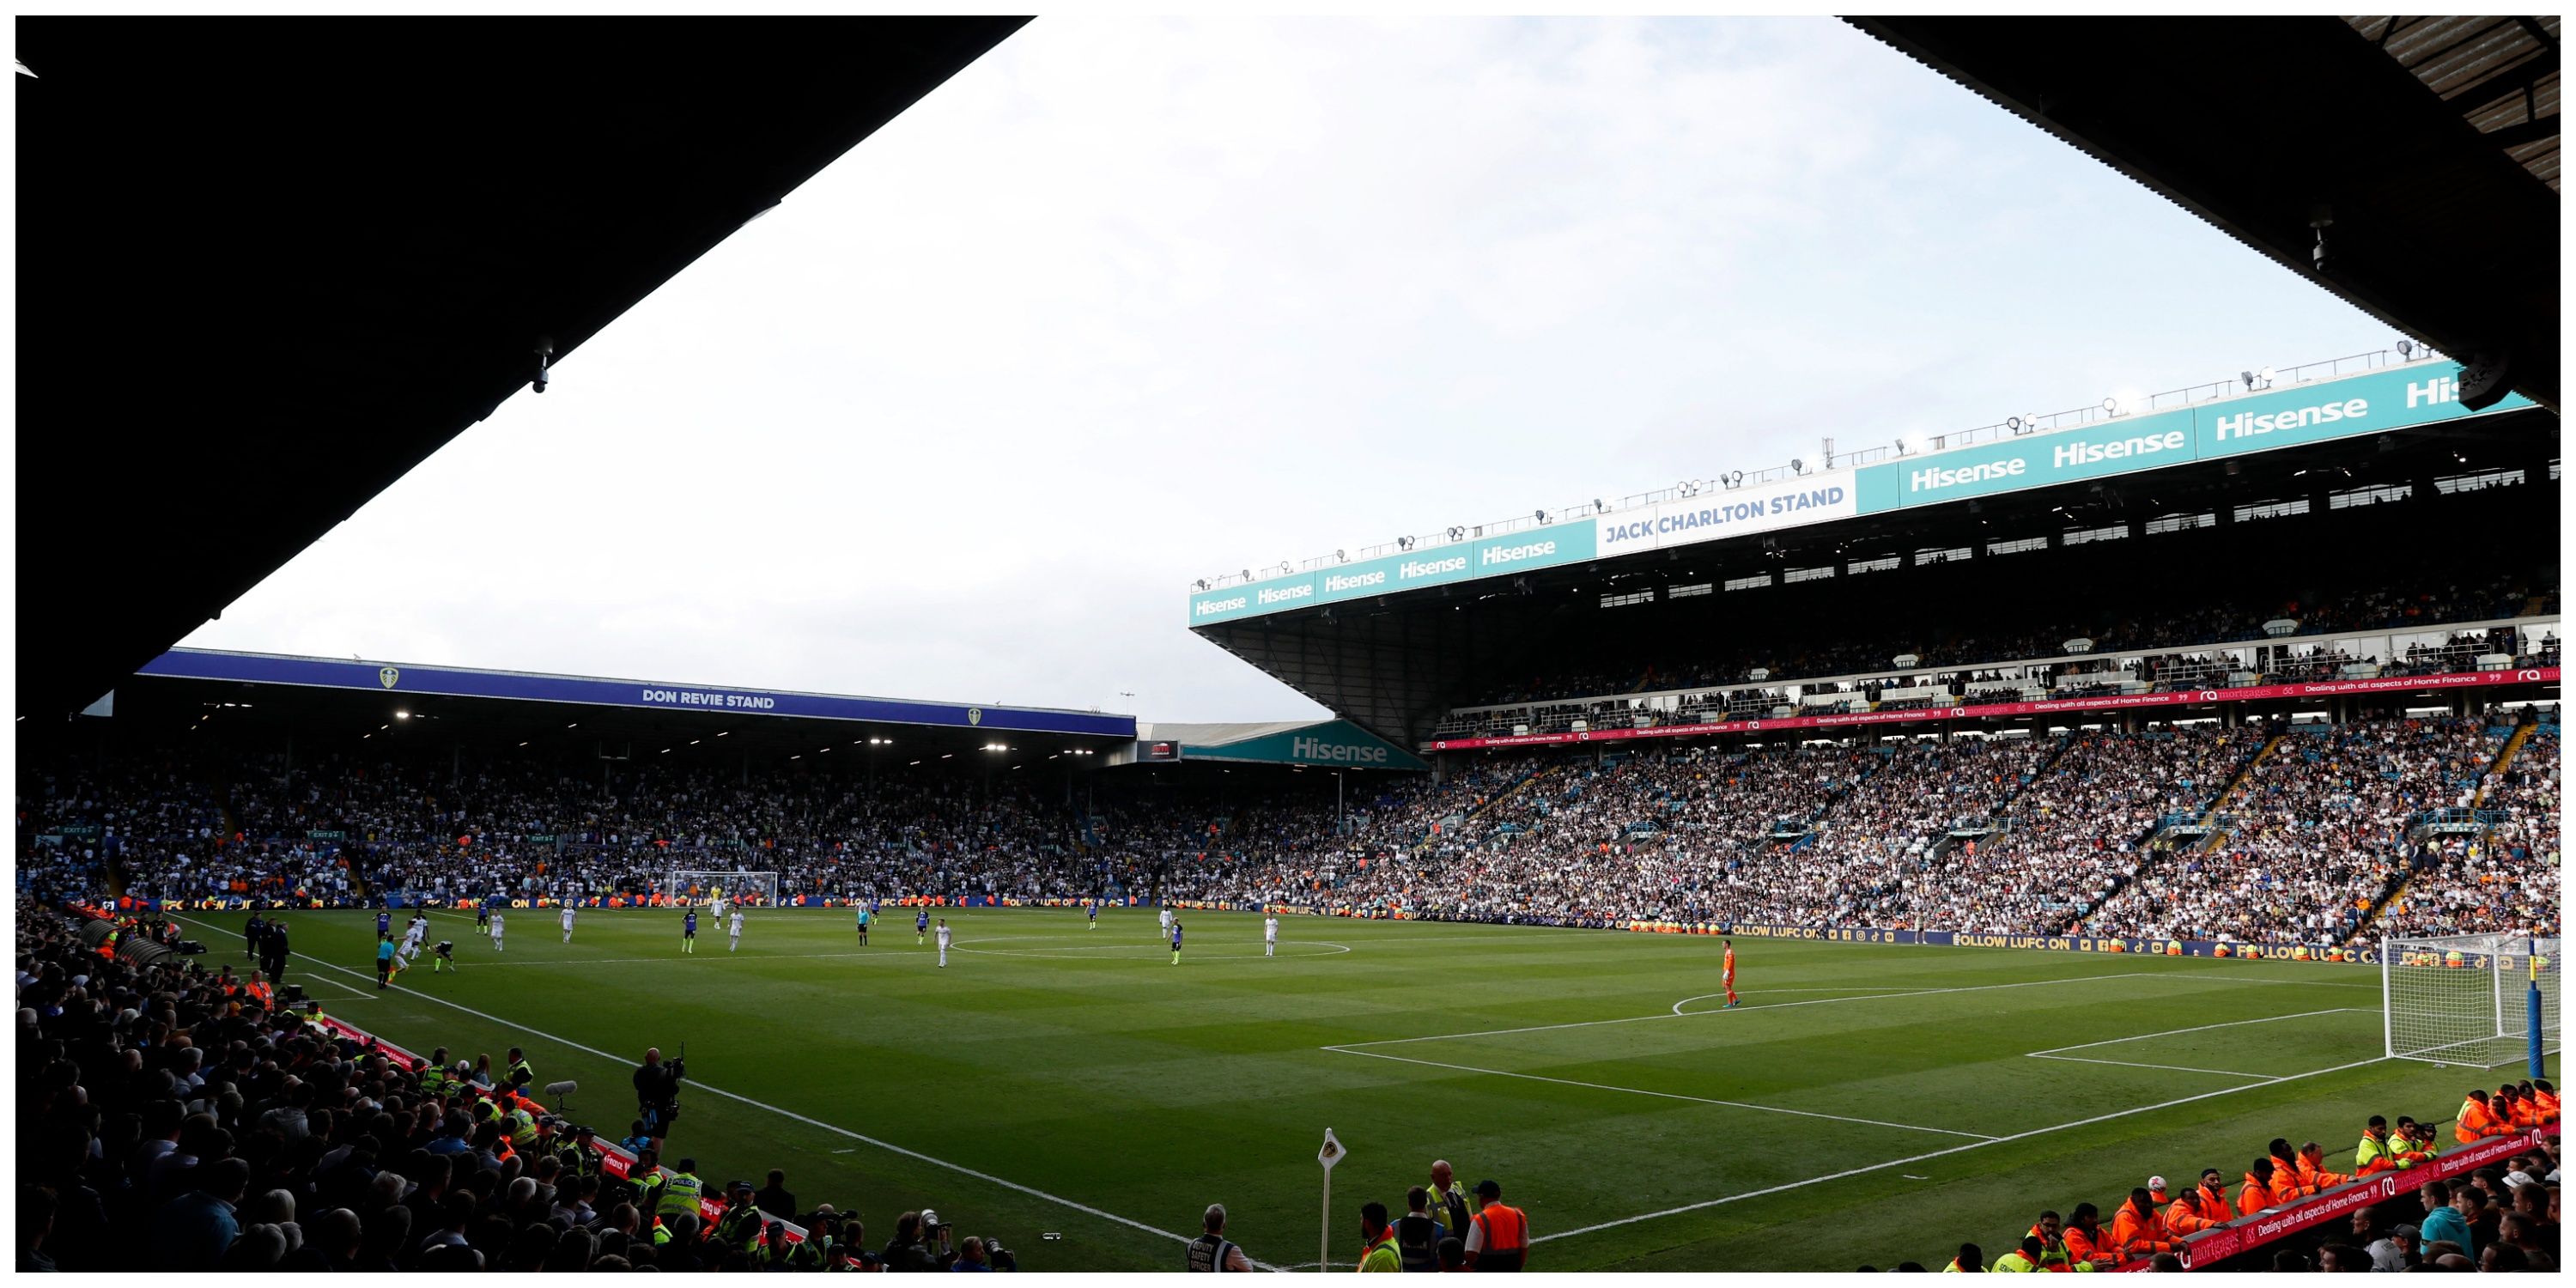 Leeds fans would ‘identify with’ £4m target at Elland Road